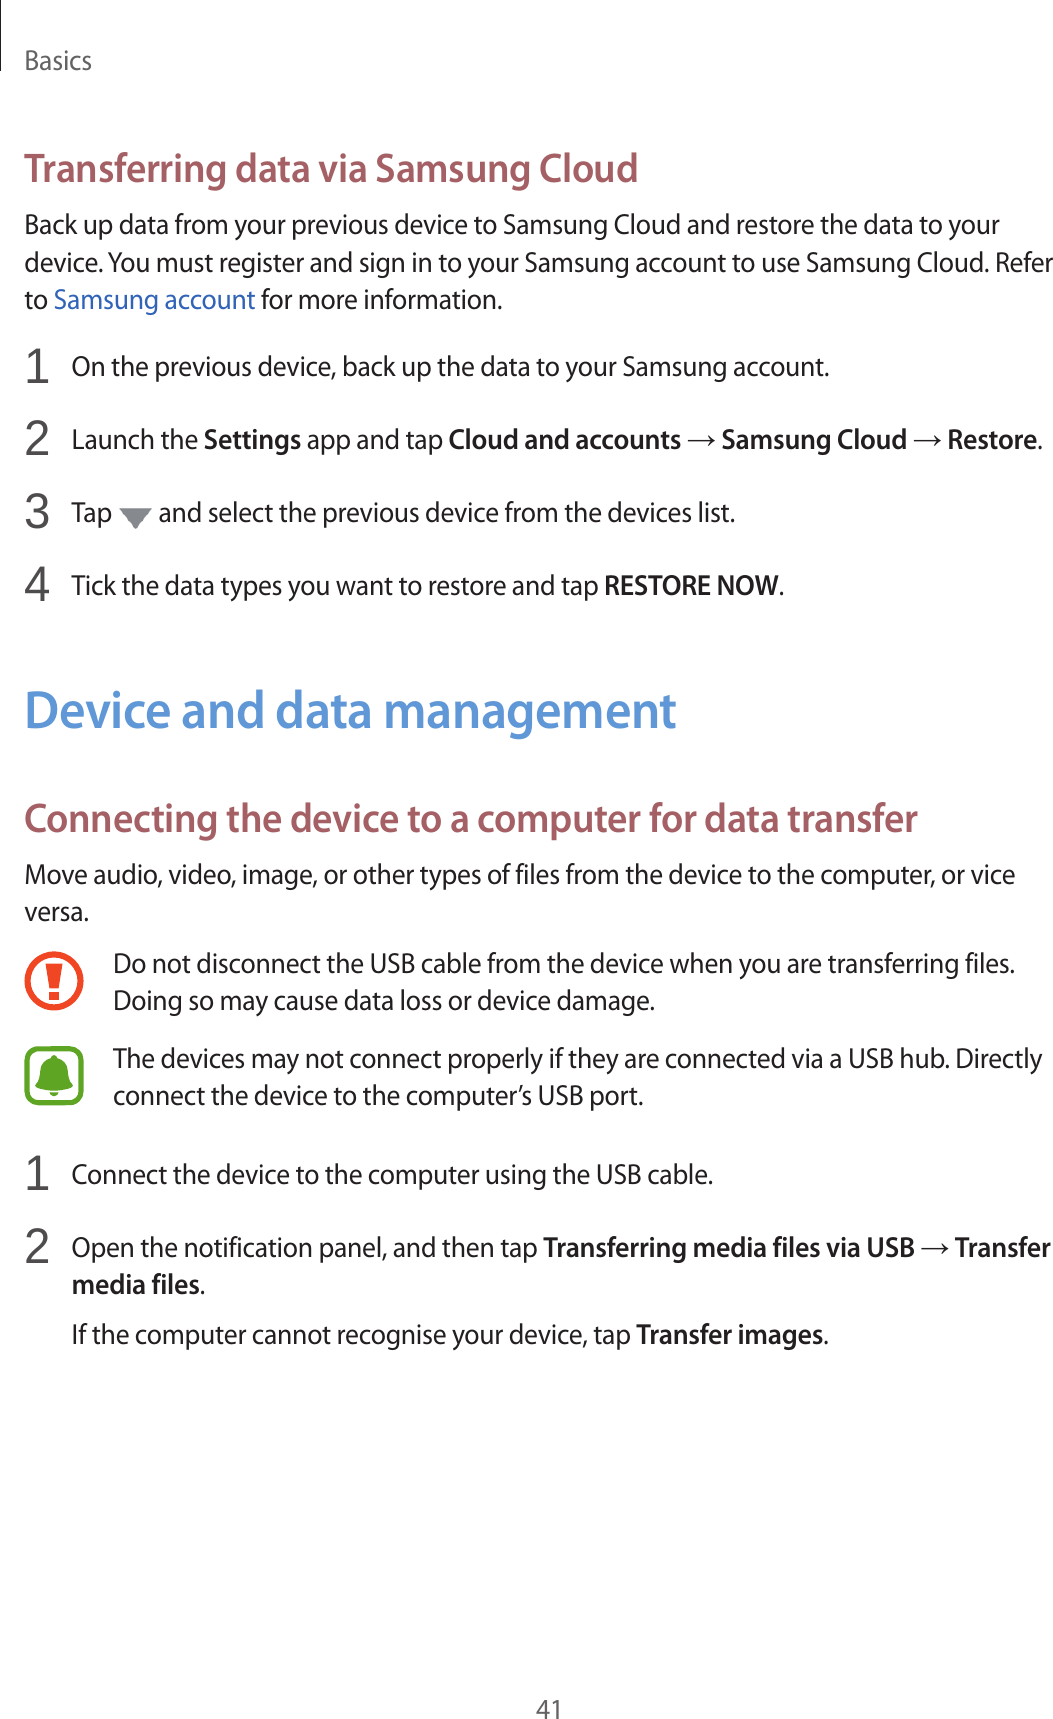 Basics41Transferring data via Samsung CloudBack up data from your previous device to Samsung Cloud and restore the data to your device. You must register and sign in to your Samsung account to use Samsung Cloud. Refer to Samsung account for more information.1  On the previous device, back up the data to your Samsung account.2  Launch the Settings app and tap Cloud and accounts → Samsung Cloud → Restore.3  Tap   and select the previous device from the devices list.4  Tick the data types you want to restore and tap RESTORE NOW.Device and data managementConnecting the device to a computer for data transferMove audio, video, image, or other types of files from the device to the computer, or vice versa.Do not disconnect the USB cable from the device when you are transferring files. Doing so may cause data loss or device damage.The devices may not connect properly if they are connected via a USB hub. Directly connect the device to the computer’s USB port.1  Connect the device to the computer using the USB cable.2  Open the notification panel, and then tap Transferring media files via USB → Transfer media files.If the computer cannot recognise your device, tap Transfer images.